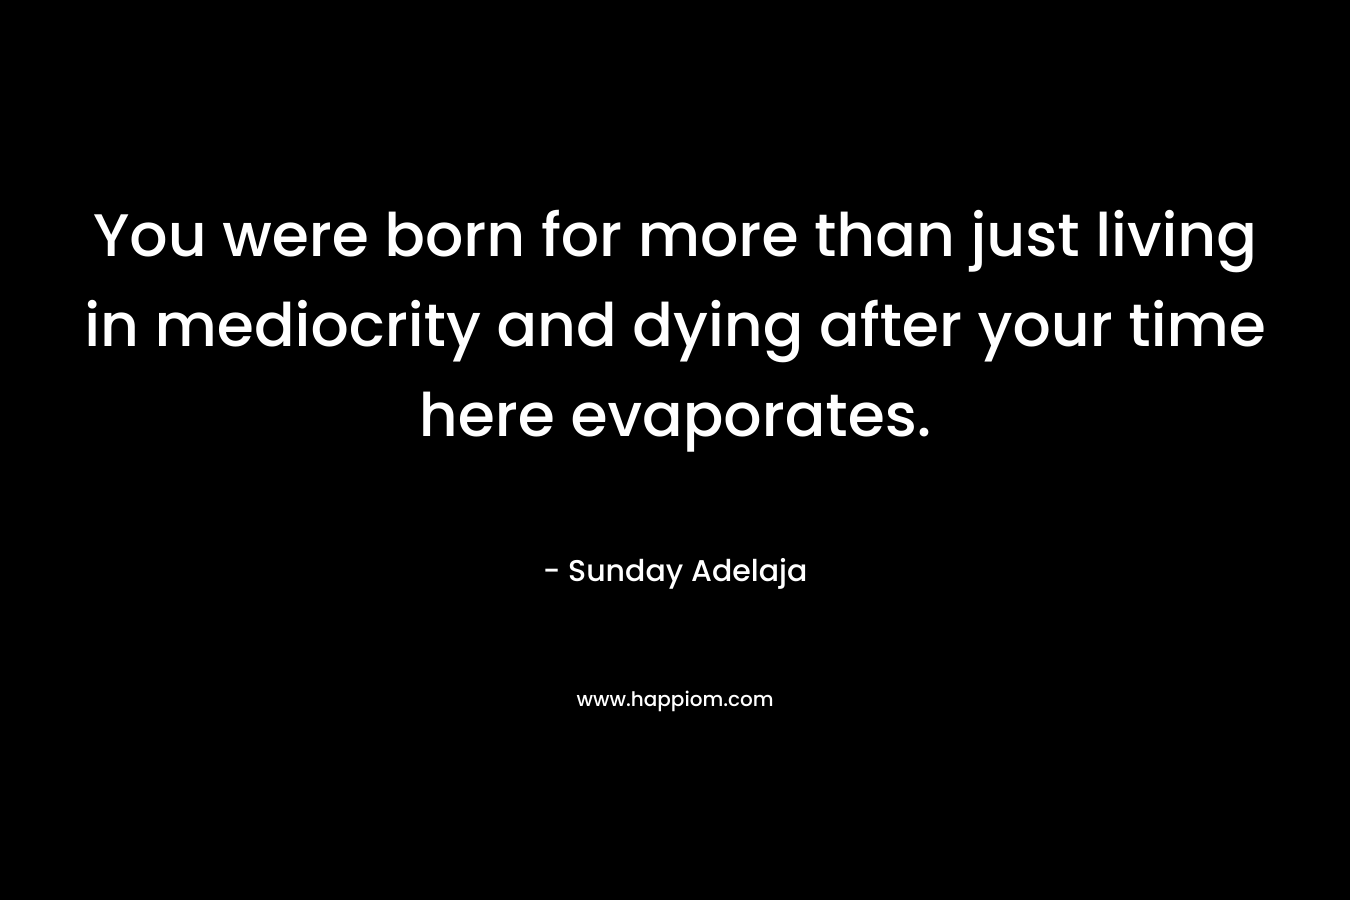 You were born for more than just living in mediocrity and dying after your time here evaporates.